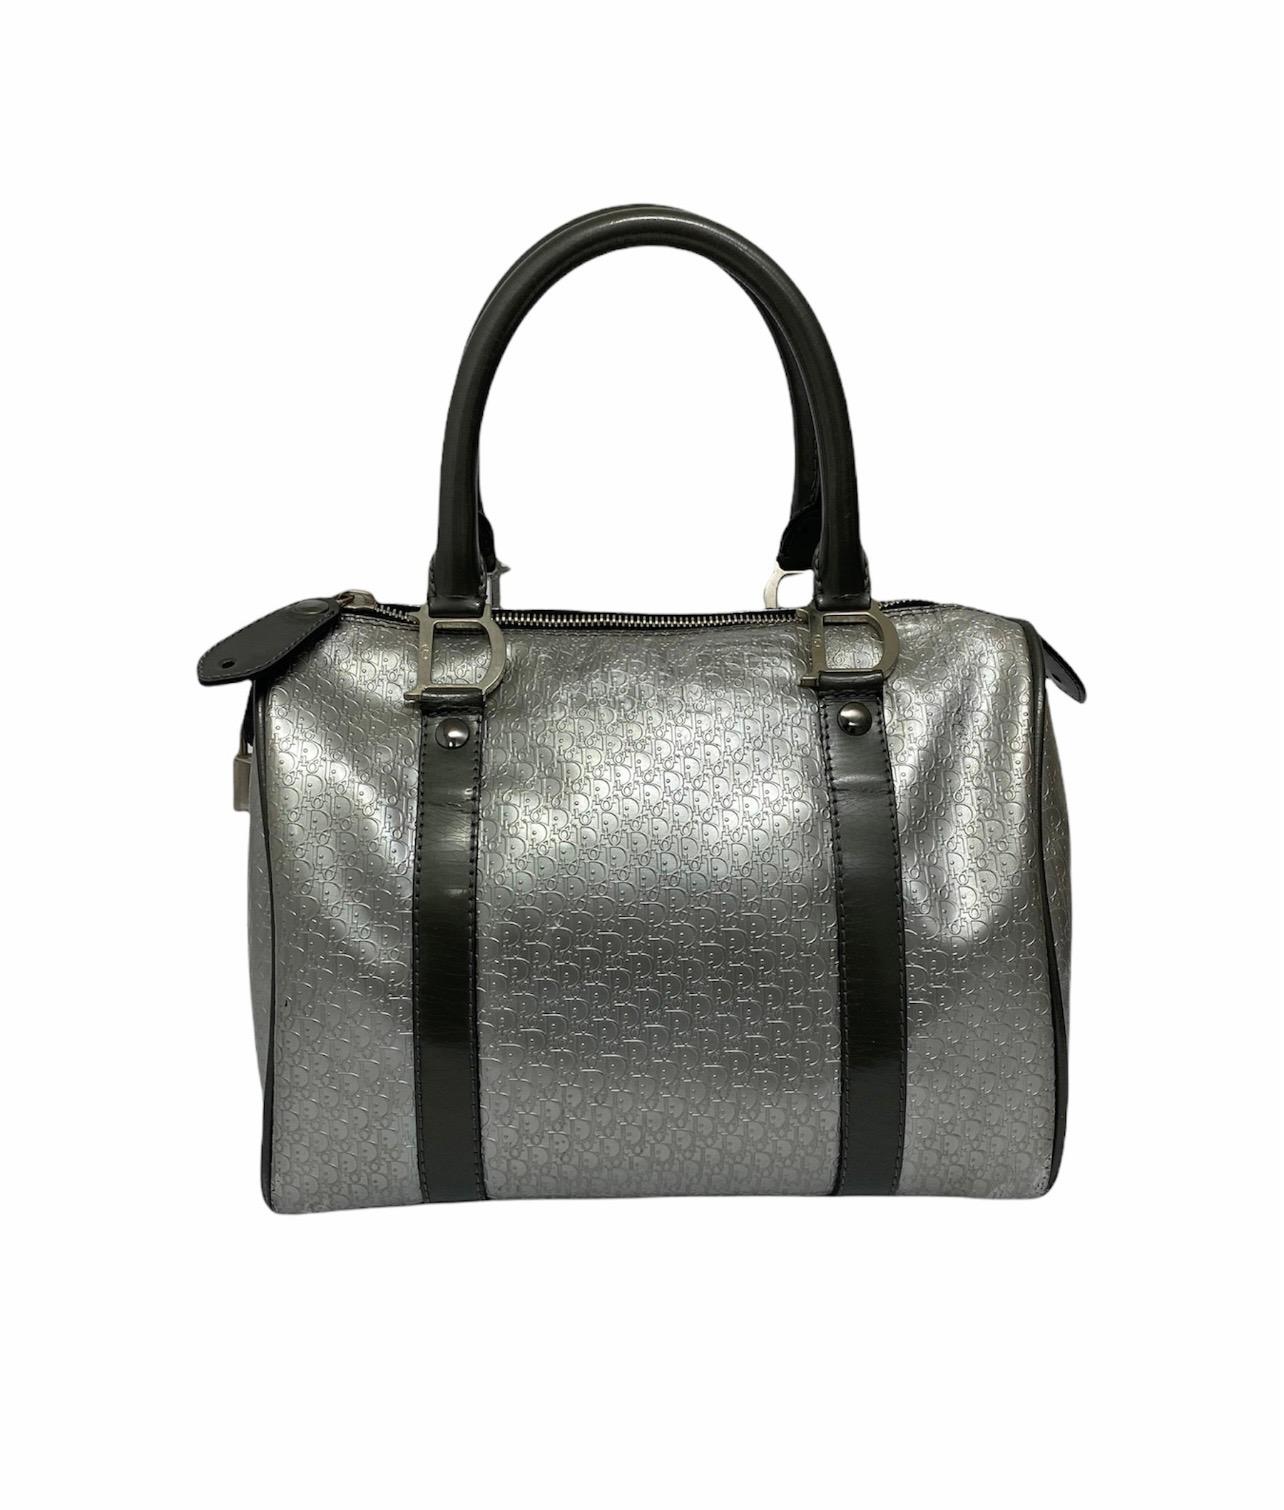 Dior Silver Leather Bag 2